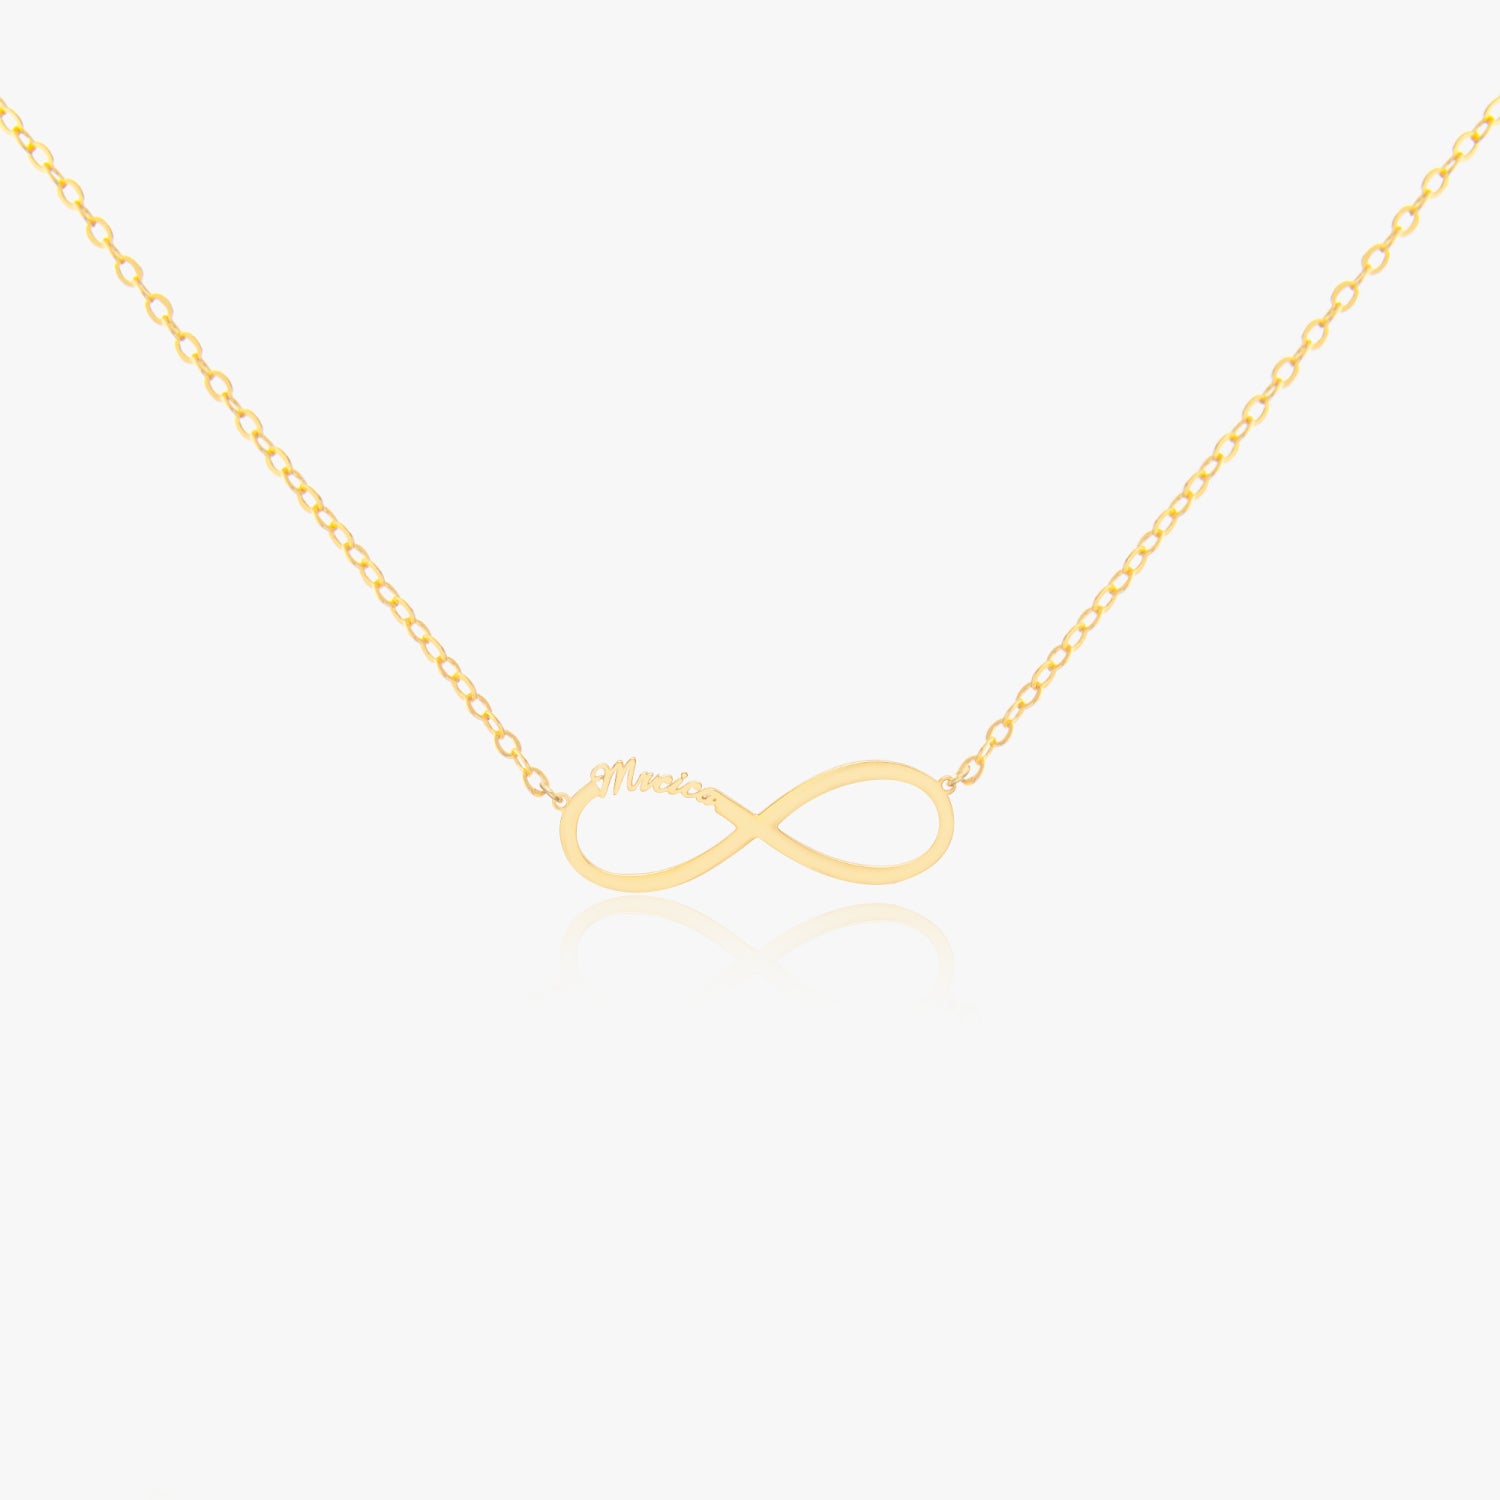 663. Infinity Necklace